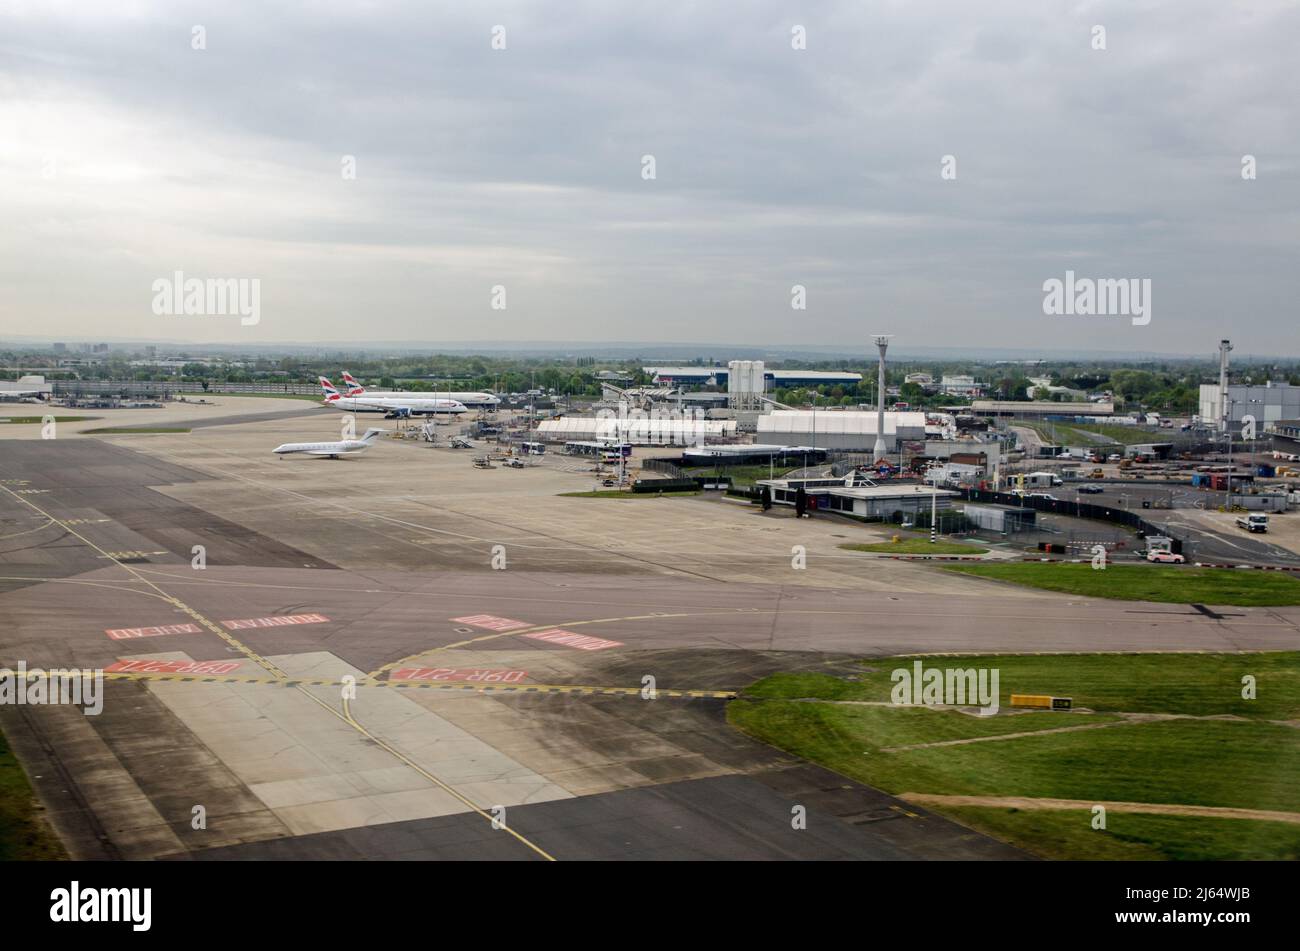 London, UK - April 19, 2022:  Aerial view of Heathrow Airport in London with the Royal Suite building towards the right hand side.  The small building Stock Photo